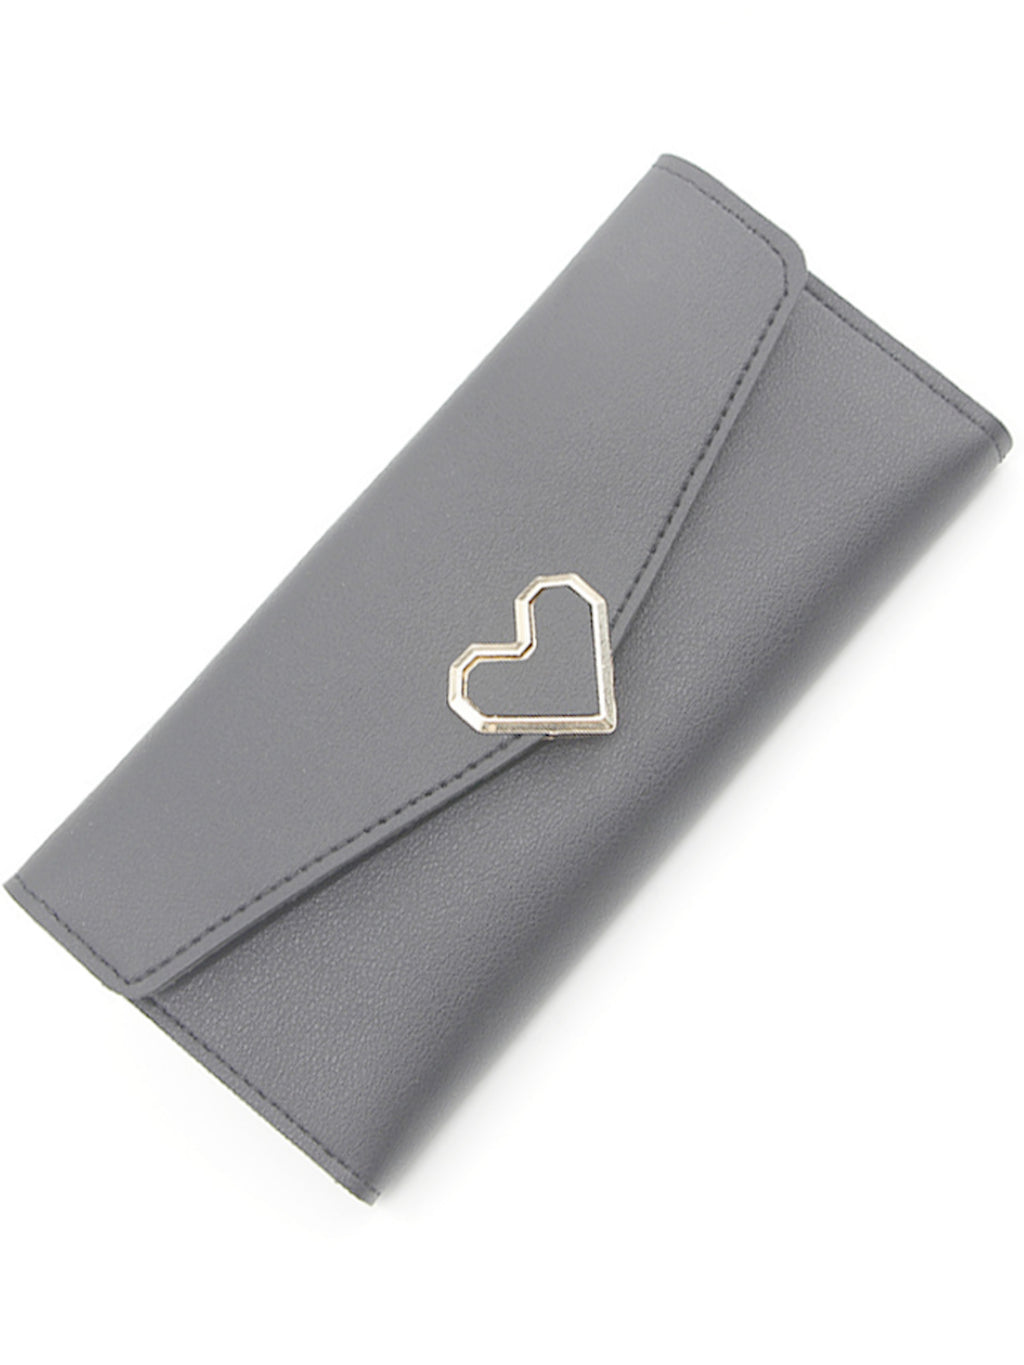 Long Organizer Wallet With Heart Closure